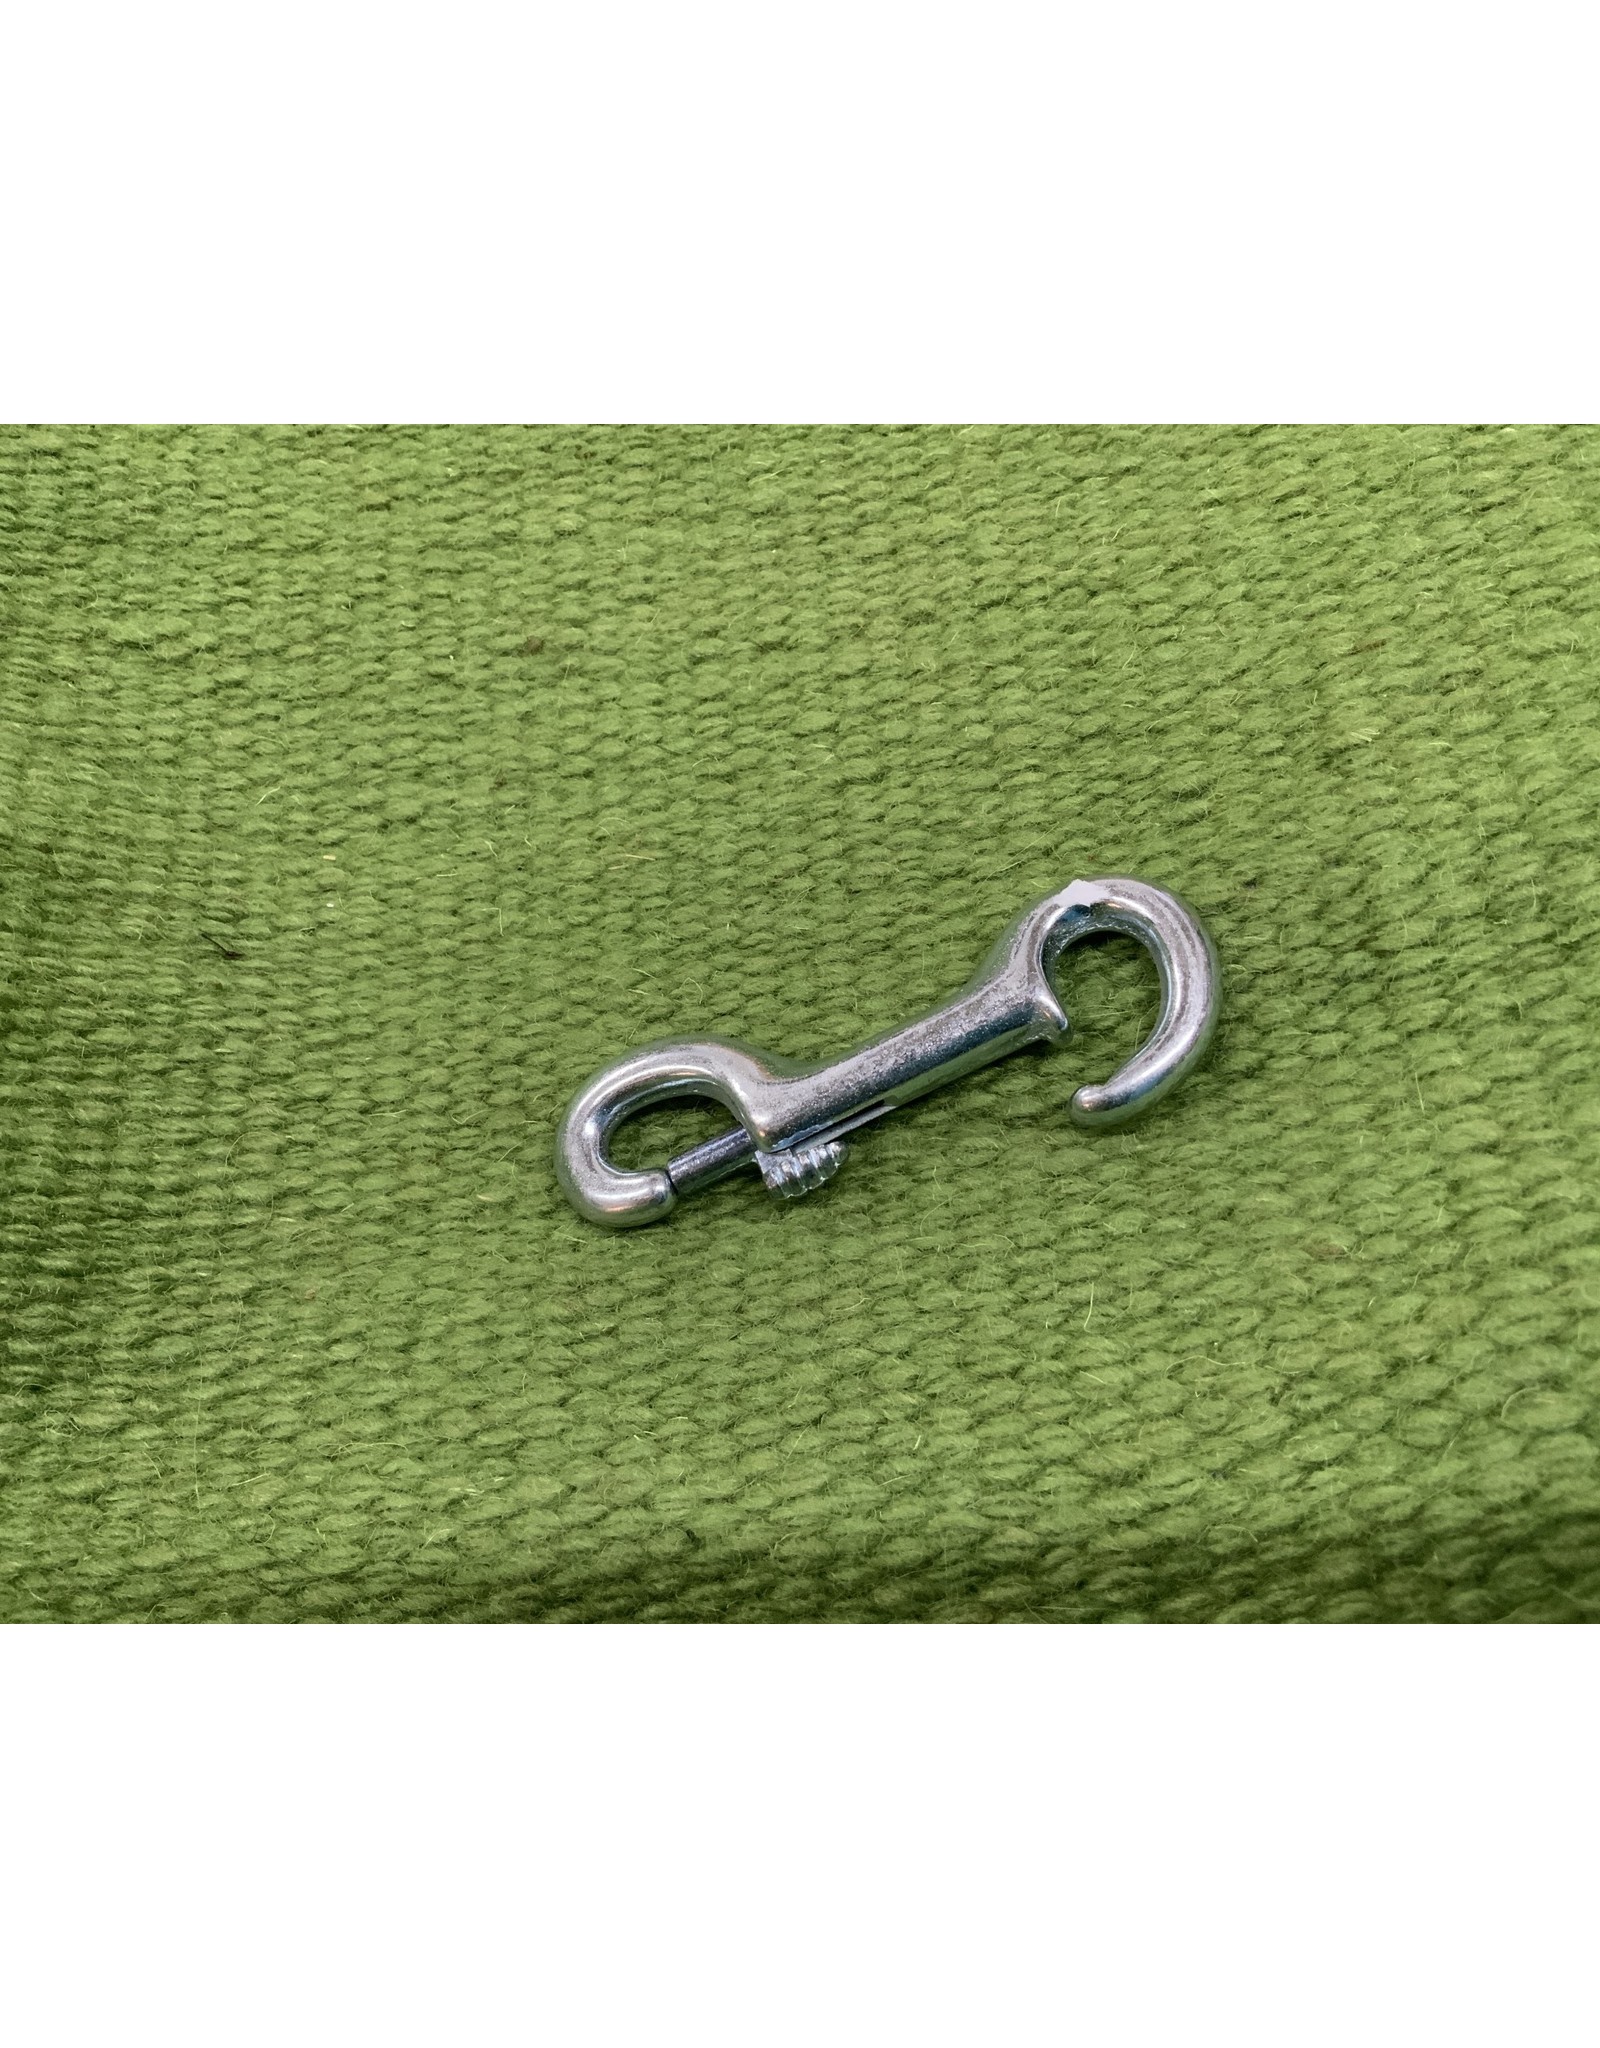 SNAP* Open End - 3 1/2" - 514702